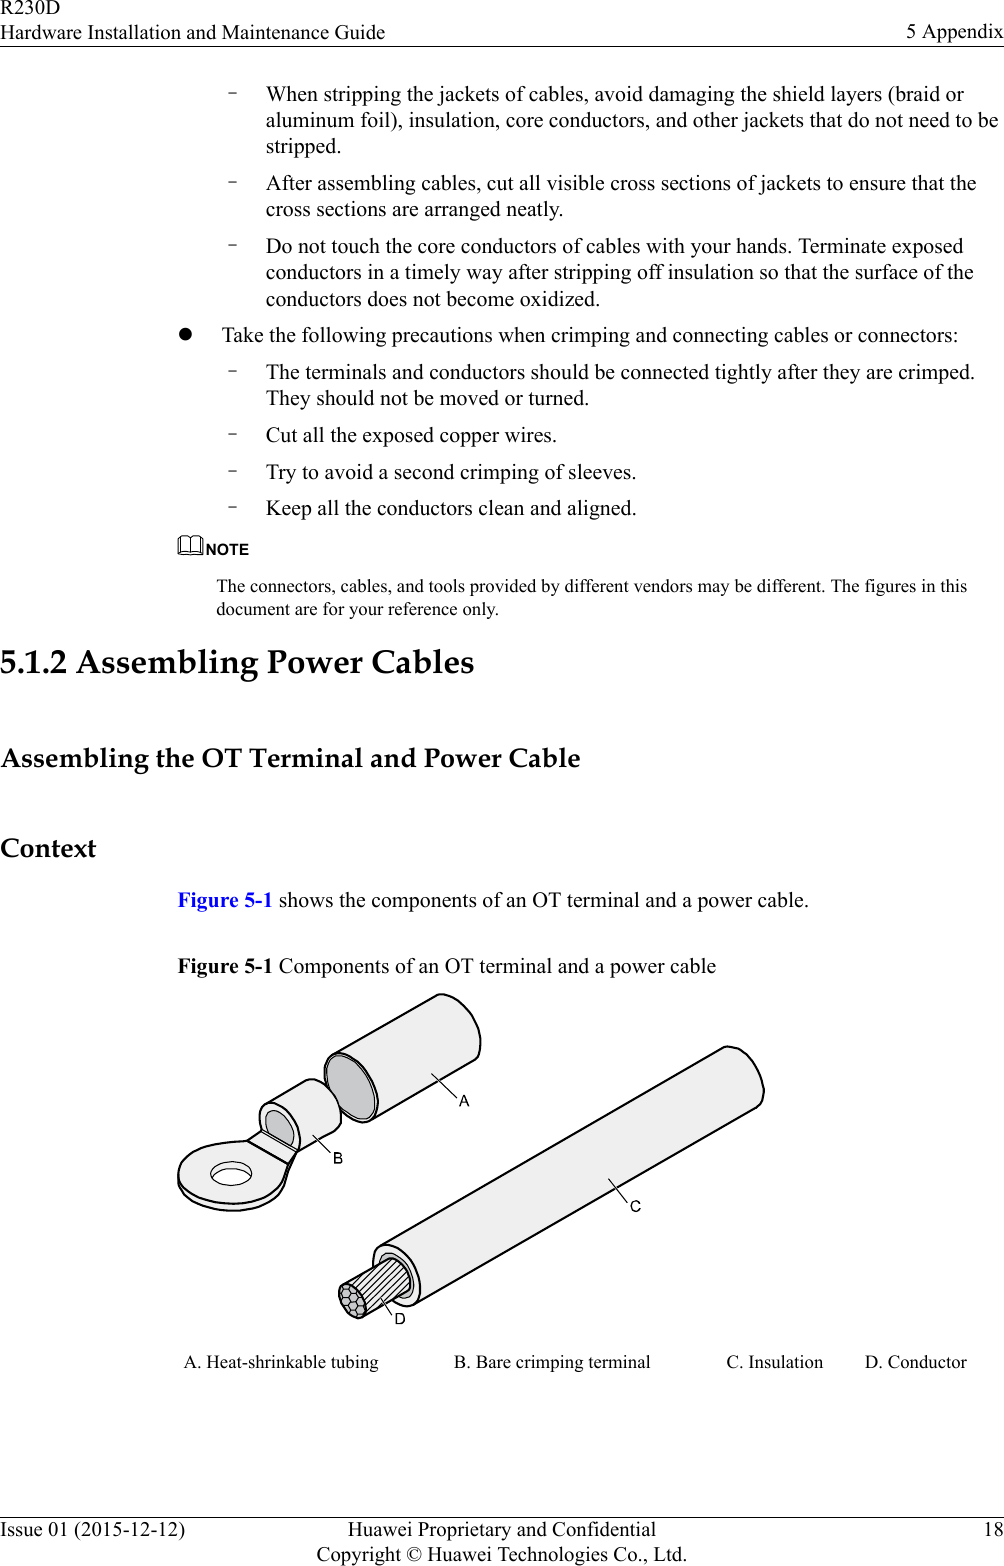 –When stripping the jackets of cables, avoid damaging the shield layers (braid oraluminum foil), insulation, core conductors, and other jackets that do not need to bestripped.–After assembling cables, cut all visible cross sections of jackets to ensure that thecross sections are arranged neatly.–Do not touch the core conductors of cables with your hands. Terminate exposedconductors in a timely way after stripping off insulation so that the surface of theconductors does not become oxidized.lTake the following precautions when crimping and connecting cables or connectors:–The terminals and conductors should be connected tightly after they are crimped.They should not be moved or turned.–Cut all the exposed copper wires.–Try to avoid a second crimping of sleeves.–Keep all the conductors clean and aligned.NOTEThe connectors, cables, and tools provided by different vendors may be different. The figures in thisdocument are for your reference only.5.1.2 Assembling Power CablesAssembling the OT Terminal and Power CableContextFigure 5-1 shows the components of an OT terminal and a power cable.Figure 5-1 Components of an OT terminal and a power cableA. Heat-shrinkable tubing B. Bare crimping terminal C. Insulation D. Conductor R230DHardware Installation and Maintenance Guide 5 AppendixIssue 01 (2015-12-12) Huawei Proprietary and ConfidentialCopyright © Huawei Technologies Co., Ltd.18